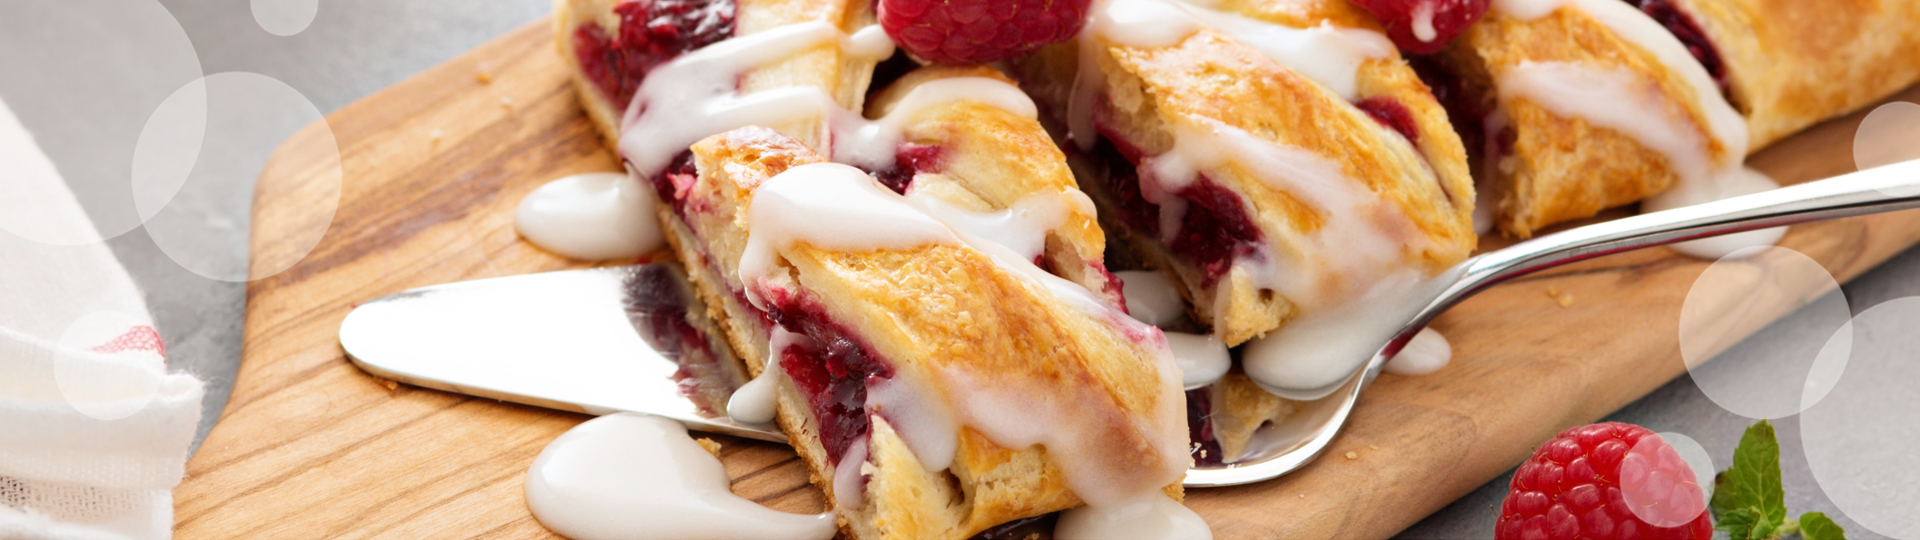 a danish with raspberry and a frosty topping